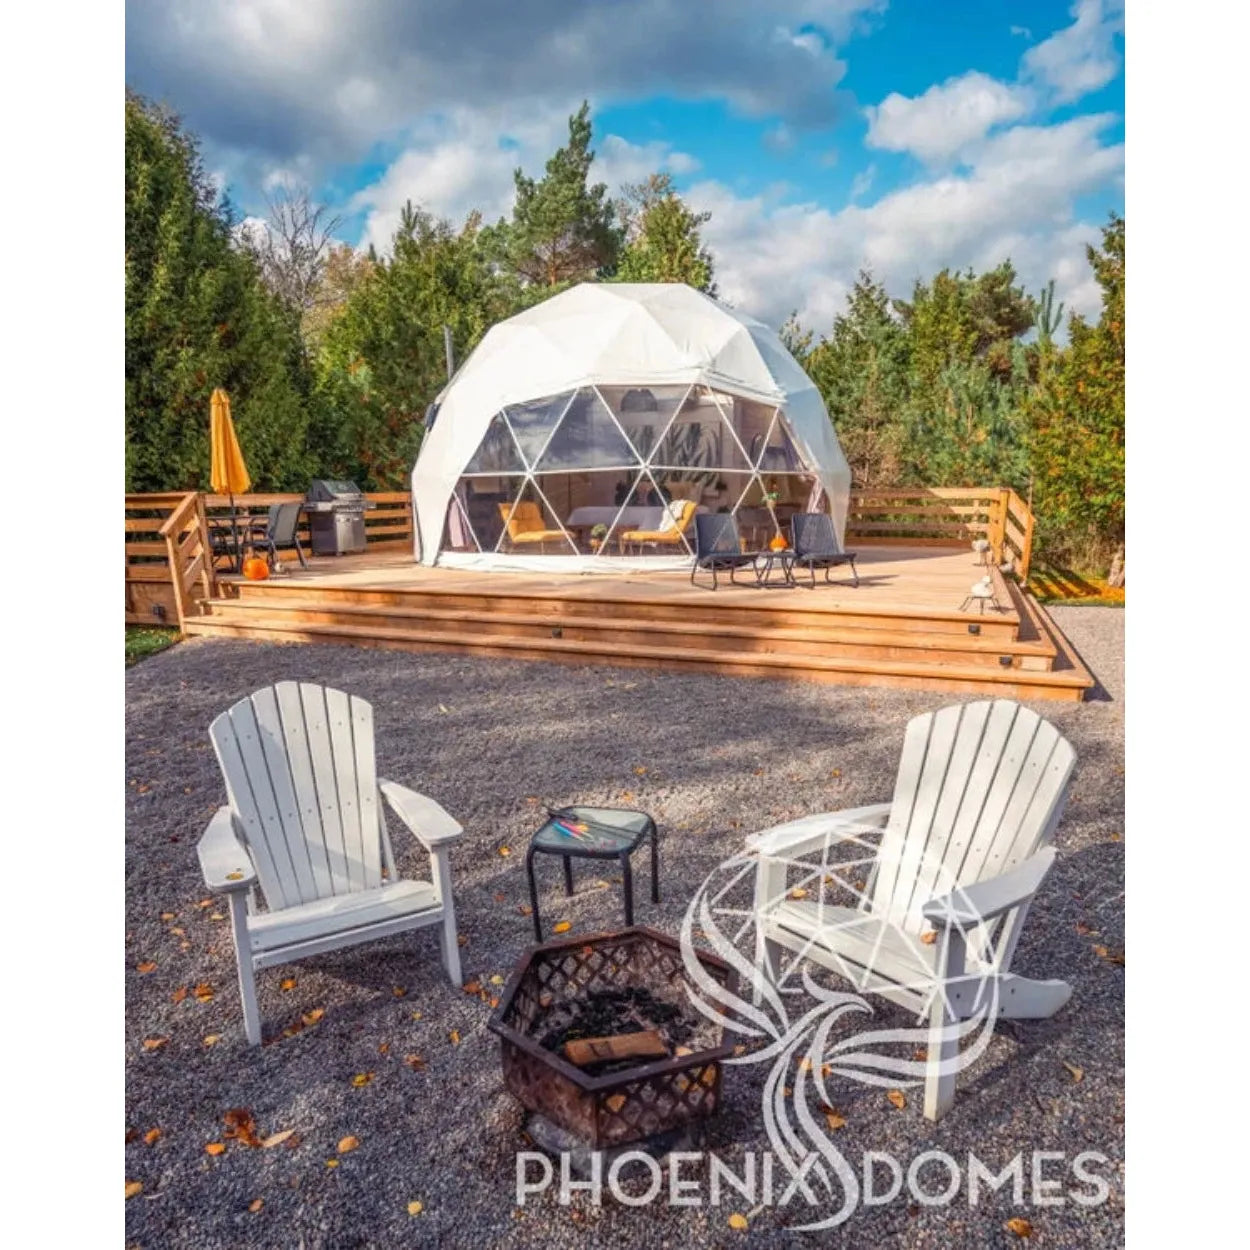 4-season-deluxe-glamping-package-dome-23-7m-115